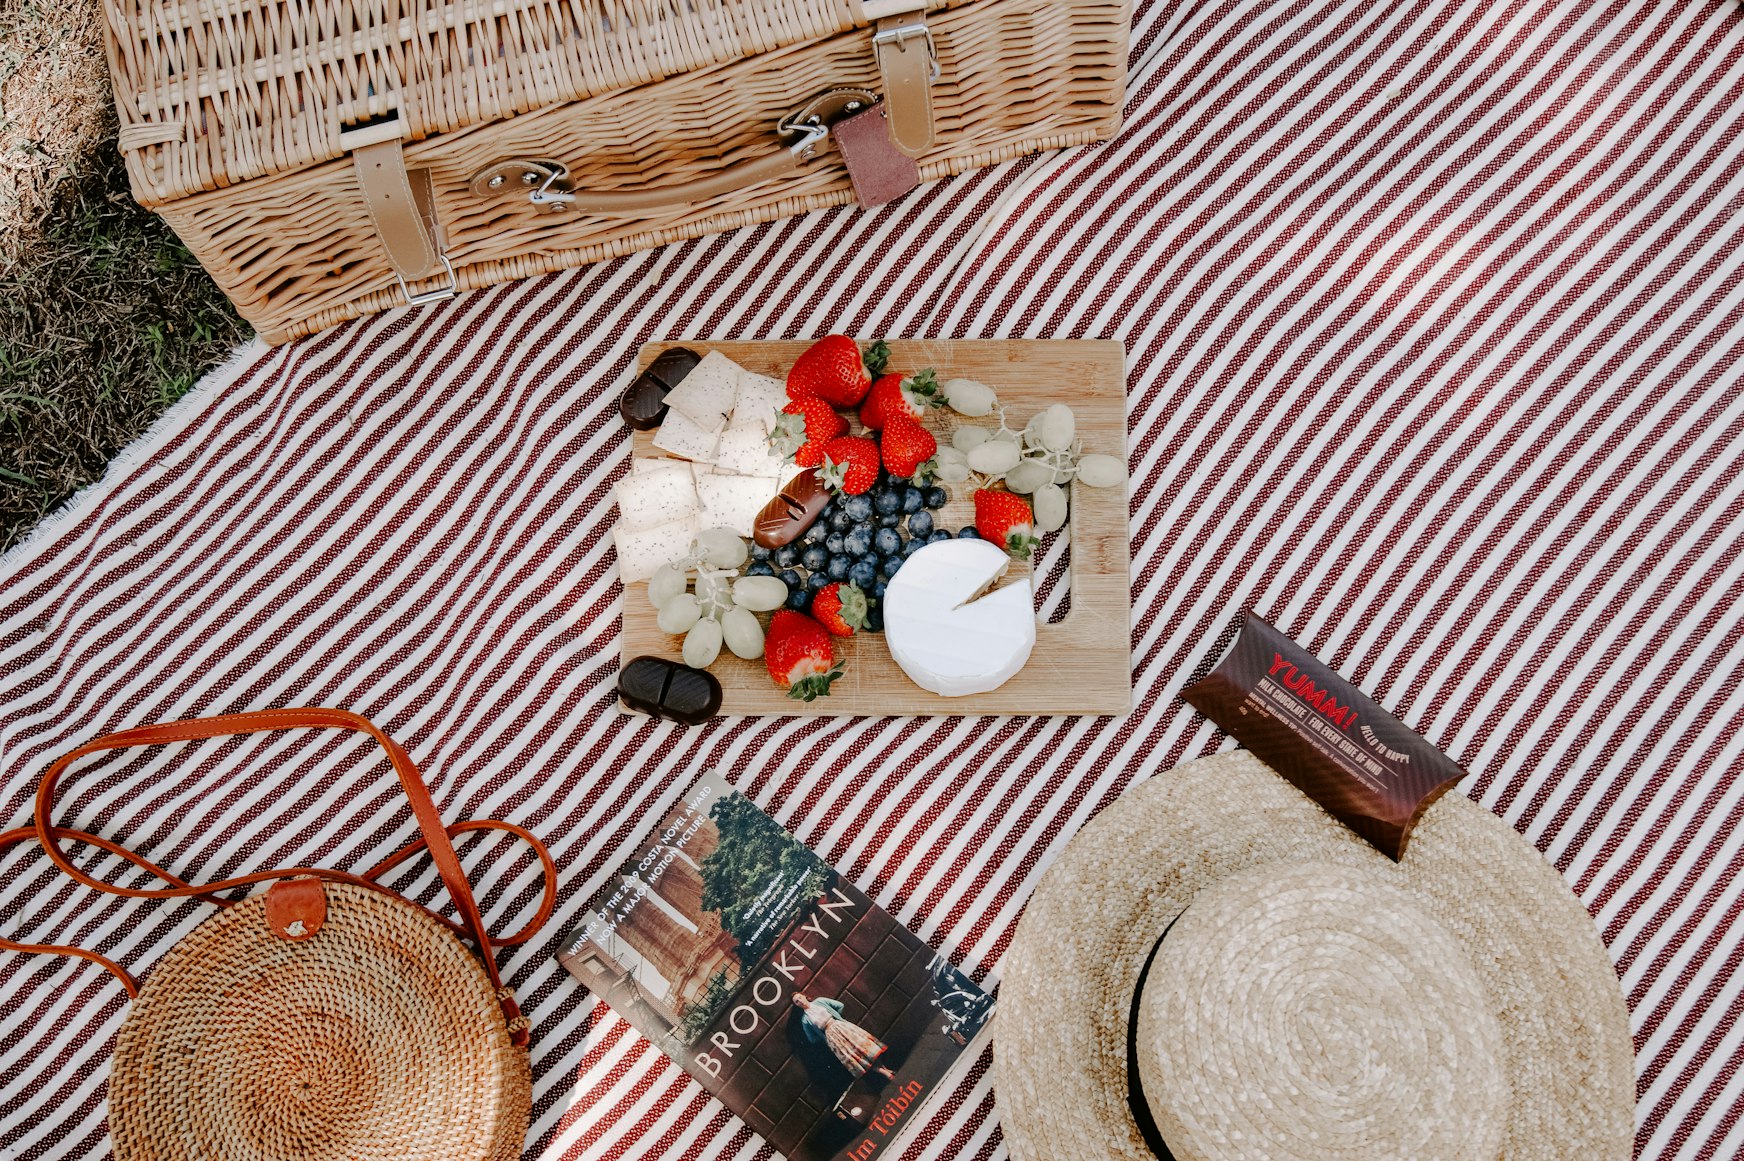 Picnic Summer Images & Pictures Food Images & Pictures Hat Flatlay Flat Lay July 4 Weekend Meal Vacation People Images & Pictures Human Leisure Activities Hd Red Wallpapers Home Decor